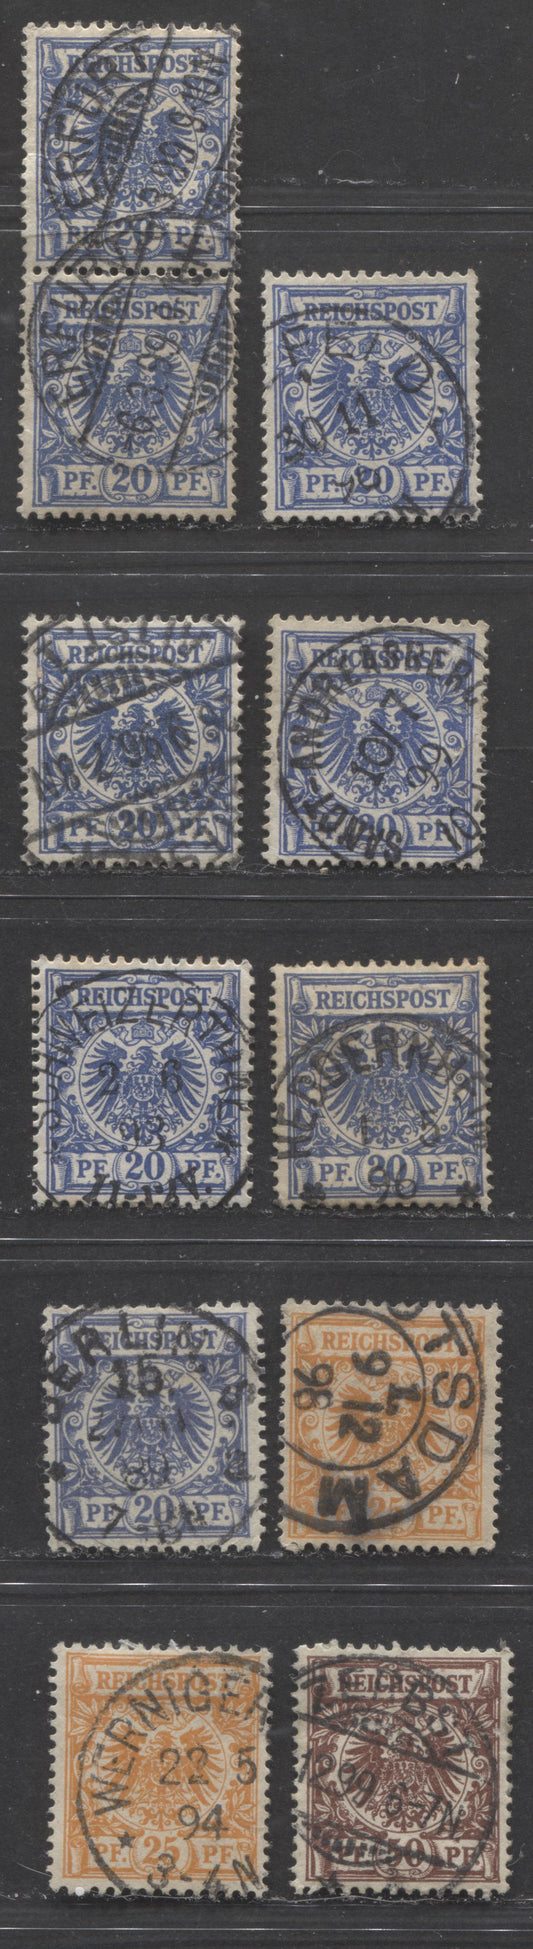 Lot 431 Germany SC#49/51 1889-1900 Numeral & Eagle Issue, All With SON Town Cancels, 9 VF Used Singles & Pair, Click on Listing to See ALL Pictures, 2022 Scott Classic Cat. $